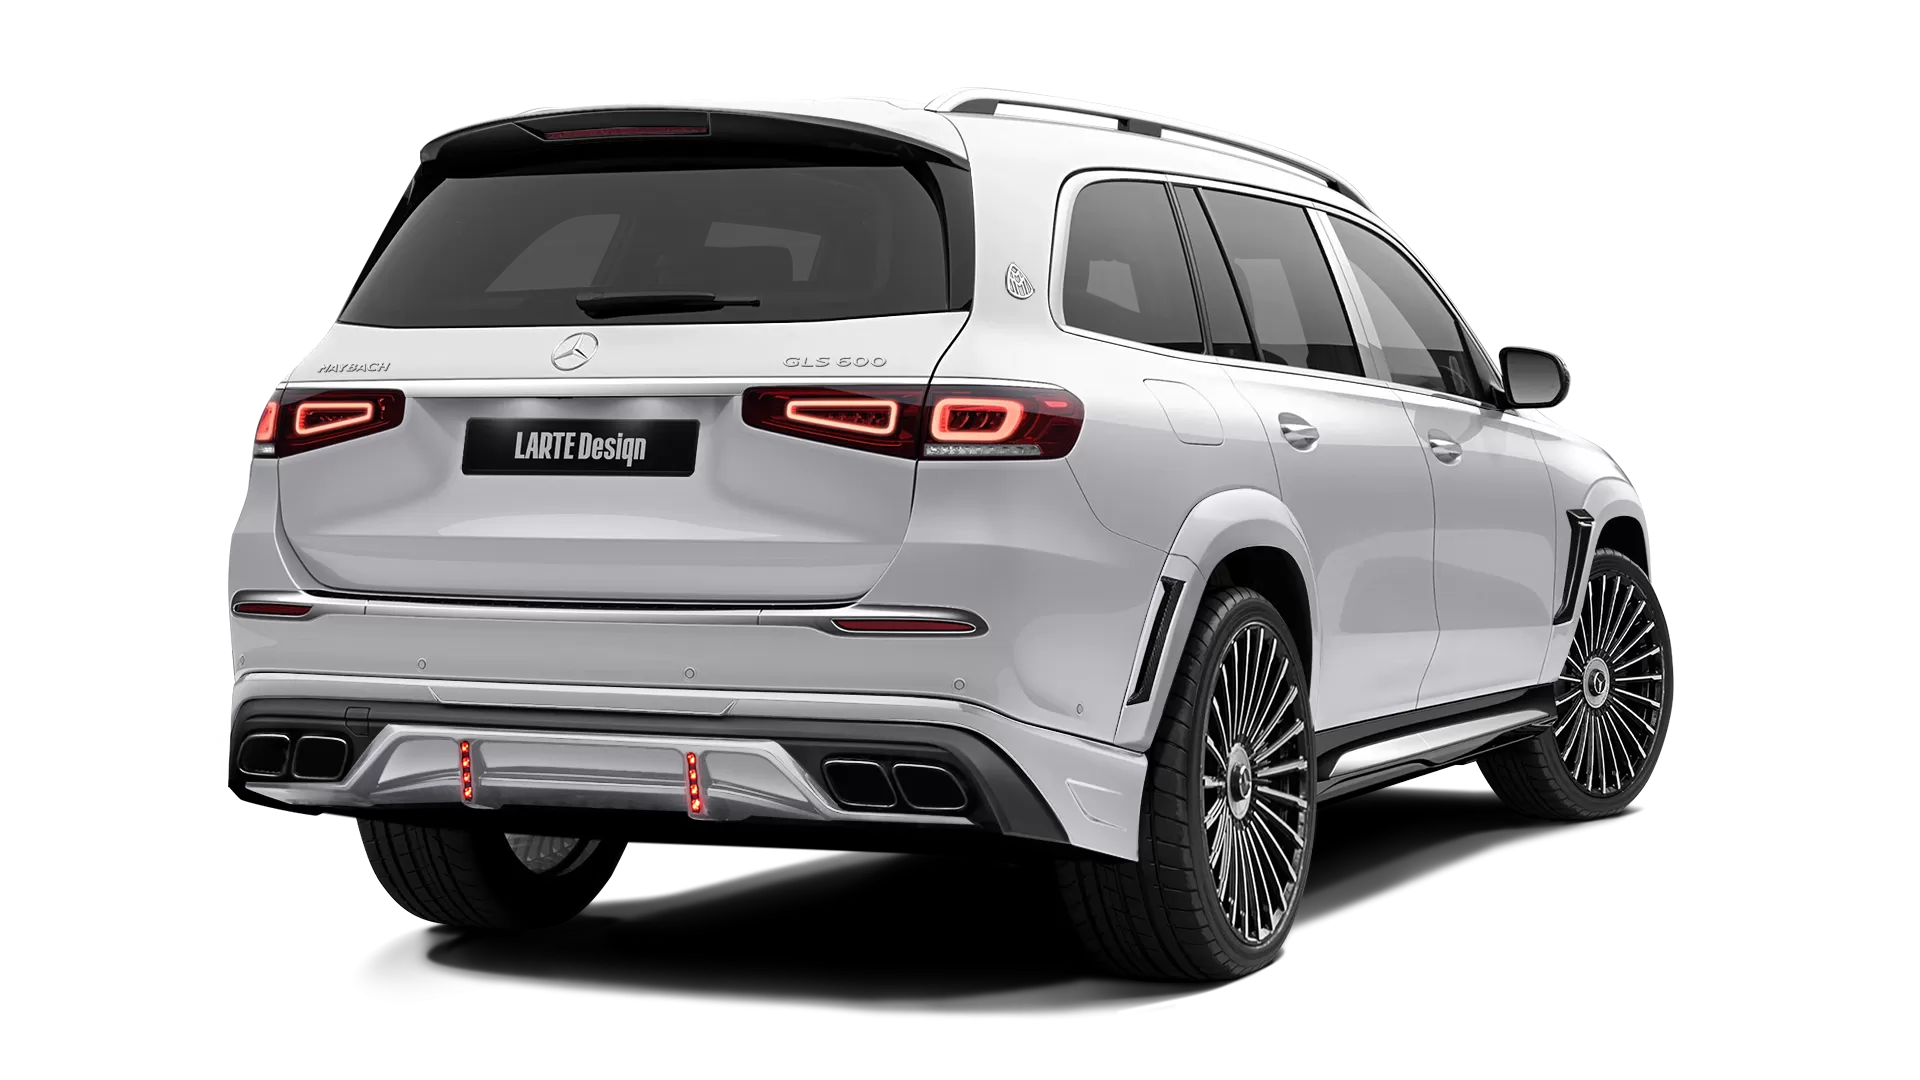 Mercedes Maybach GLS 600 with painted body kit: rear view shown in Polar White